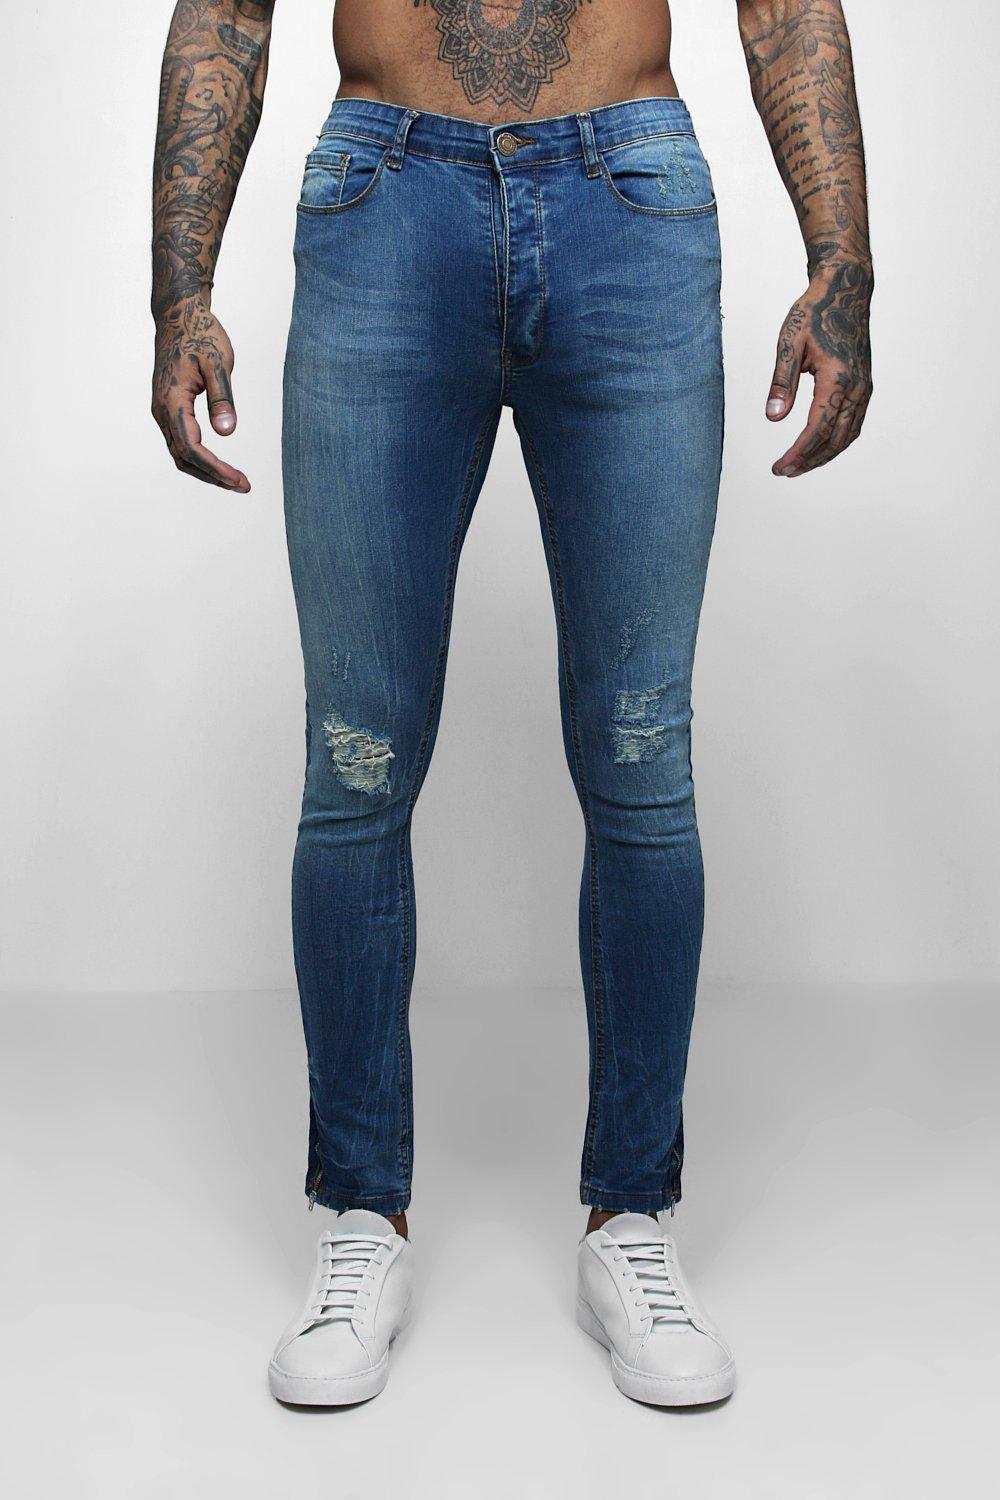 Skinny Jeans With Distressed Knees - boohooMAN